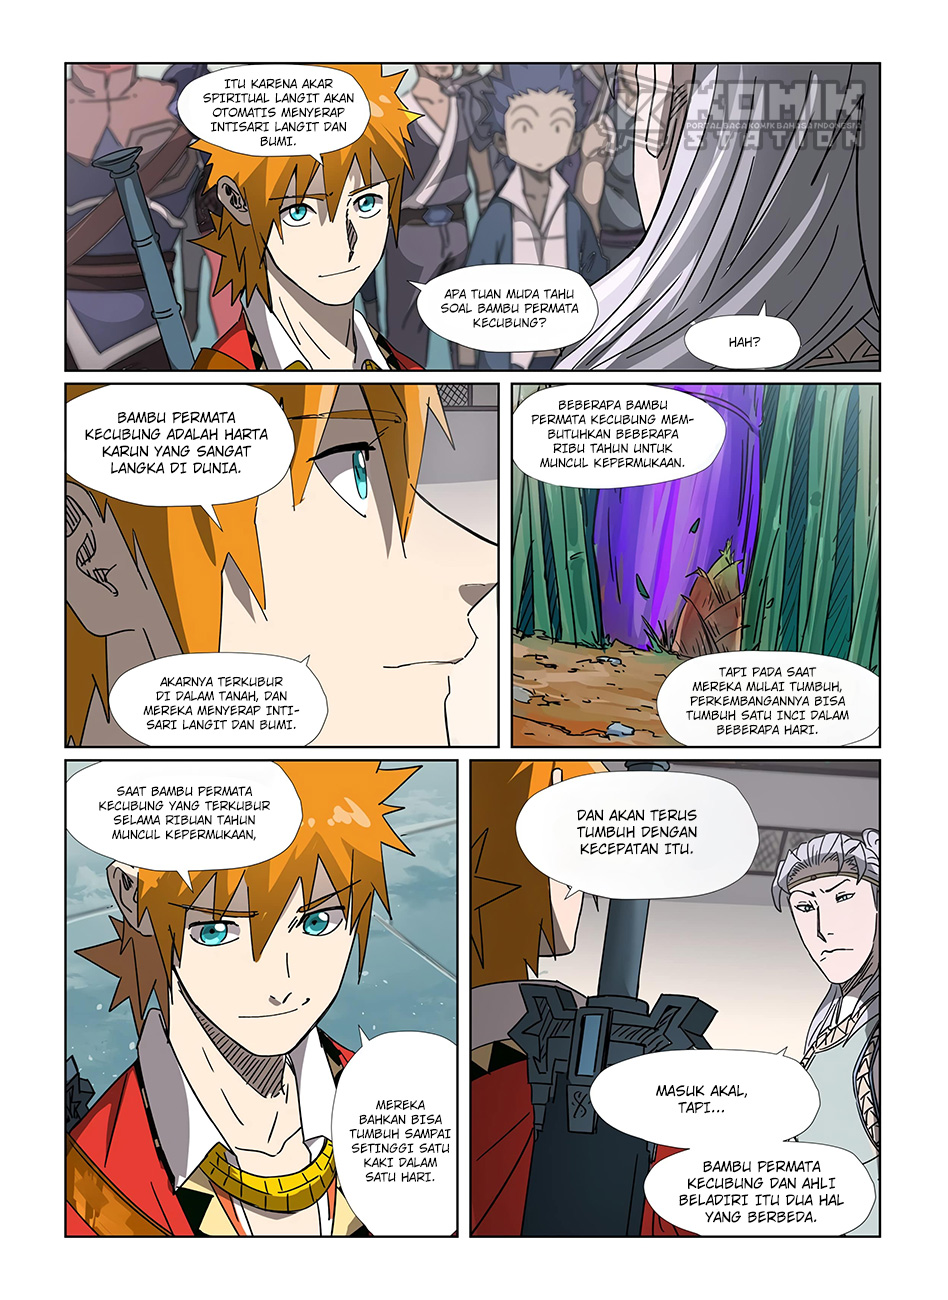 Tales of Demons and Gods Chapter 299-5